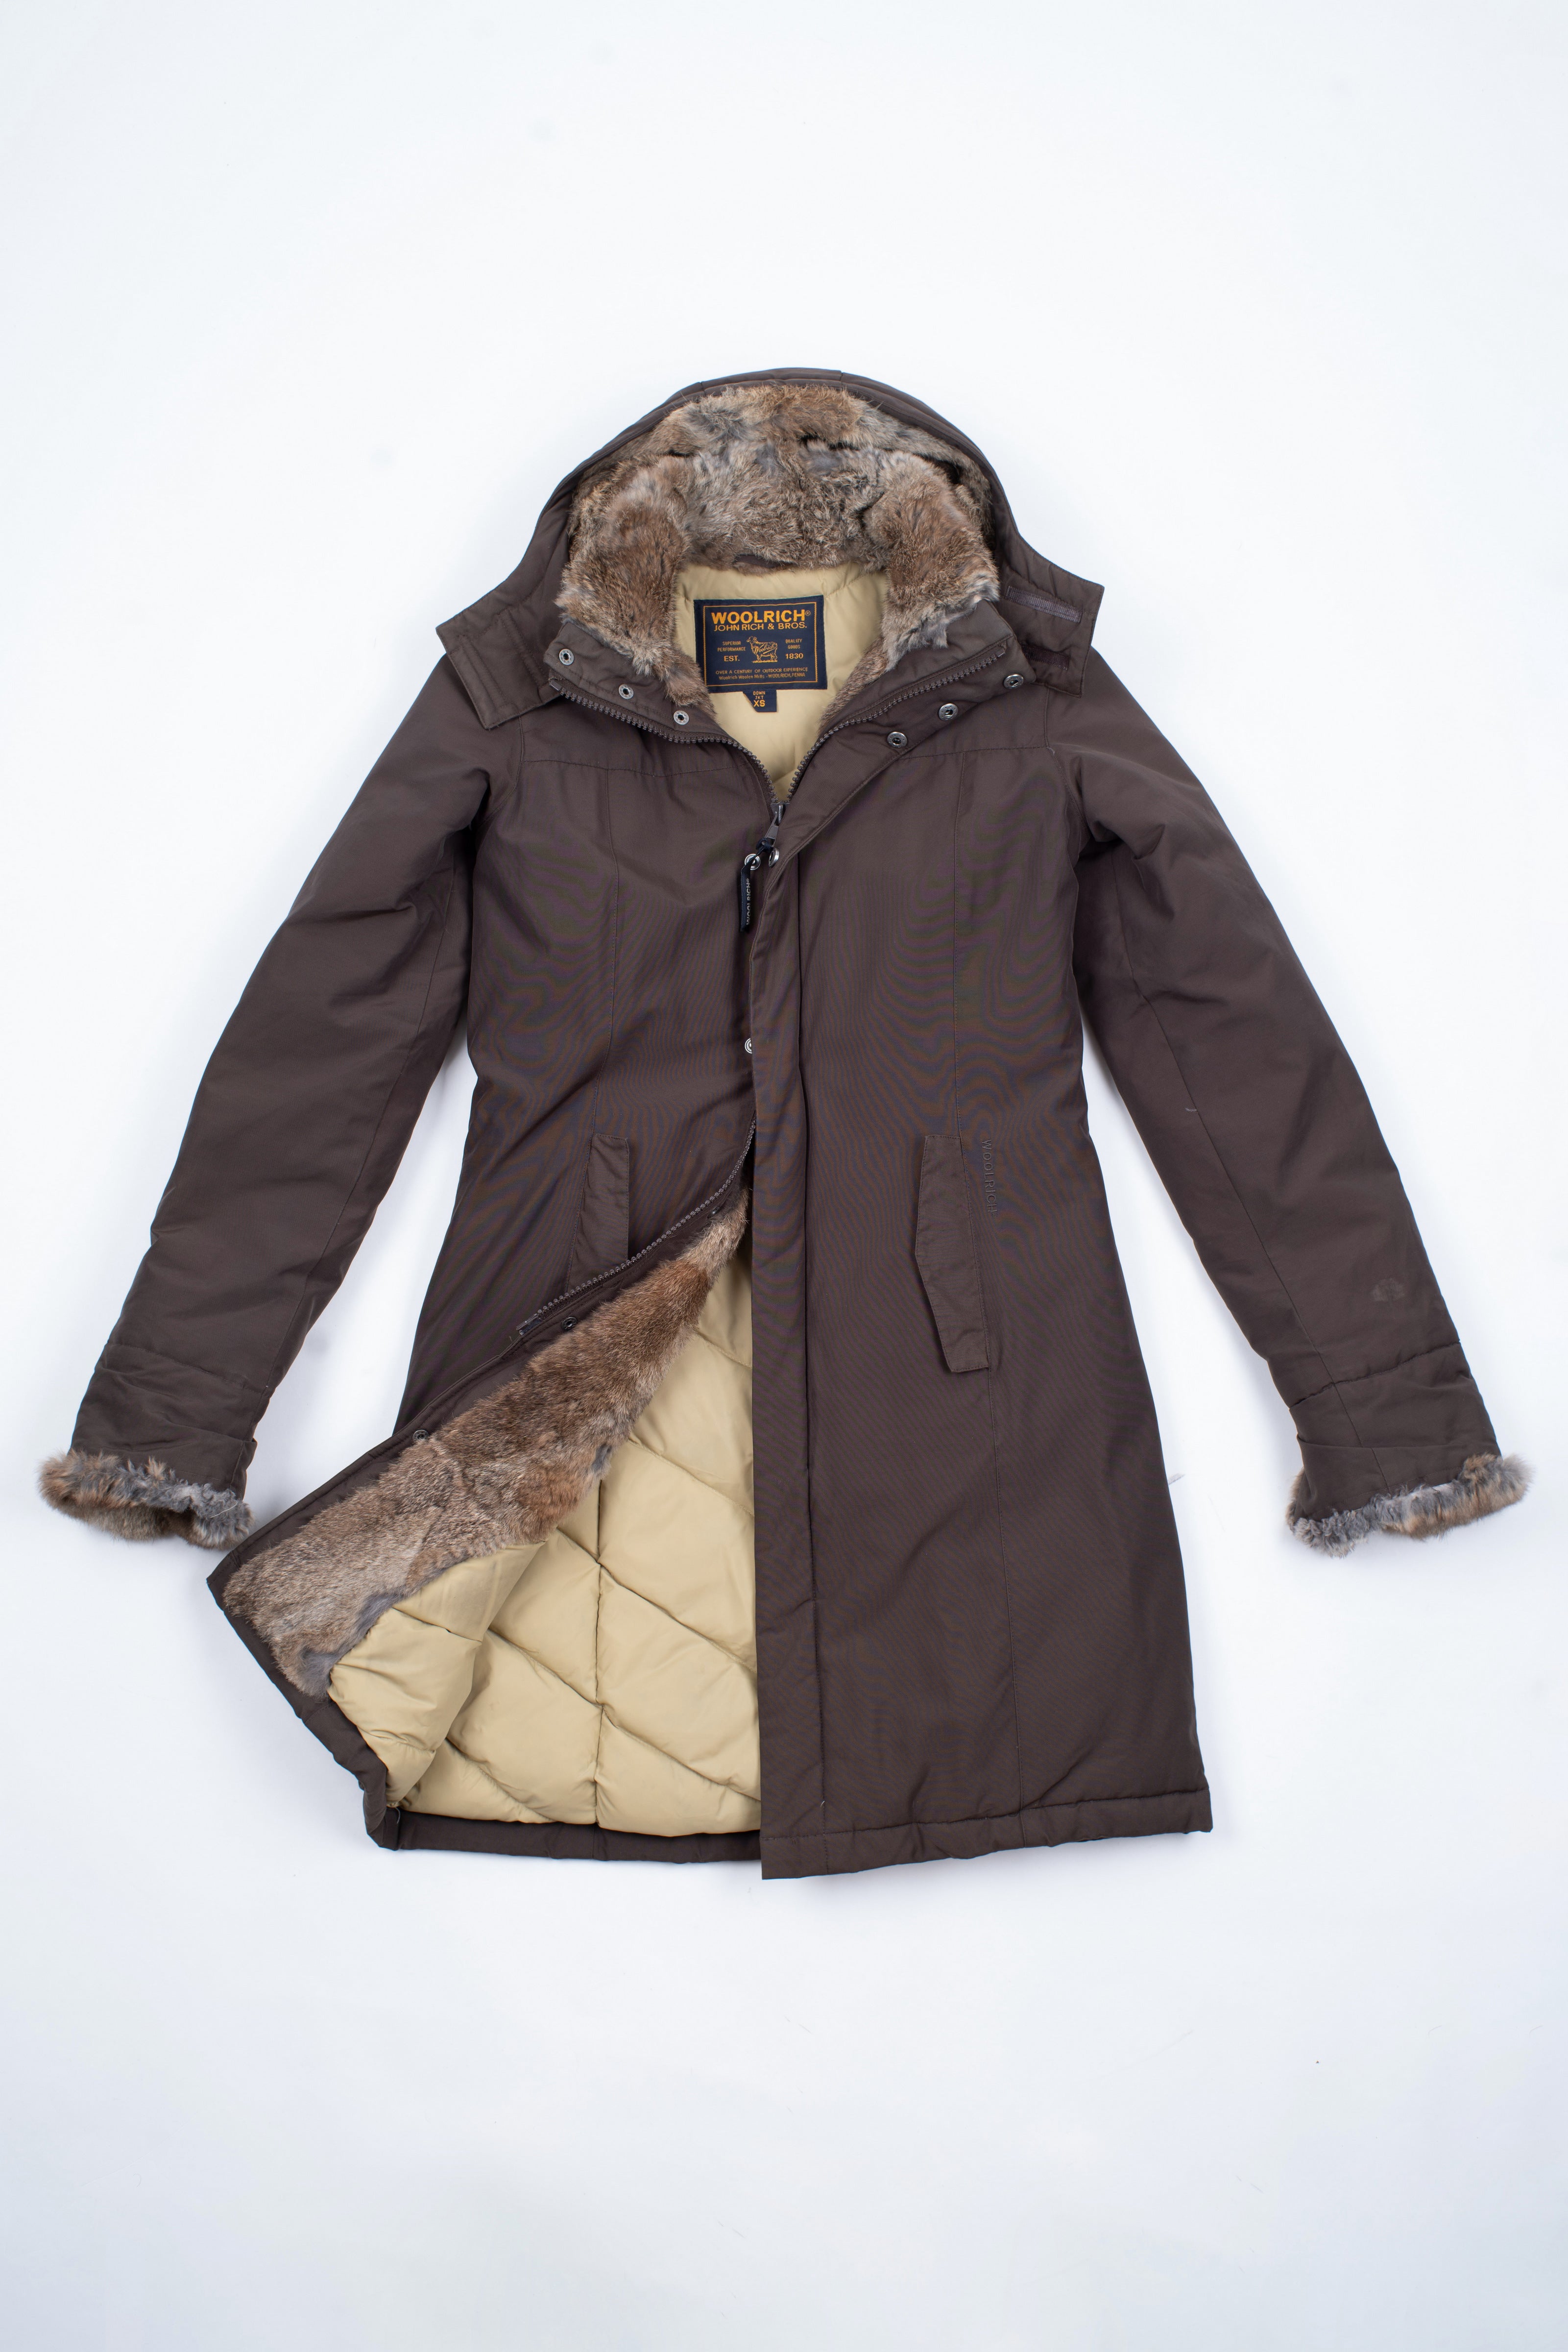 Woolrich Women's Brown Boulder Down Coat, Size XS – SecondFirst